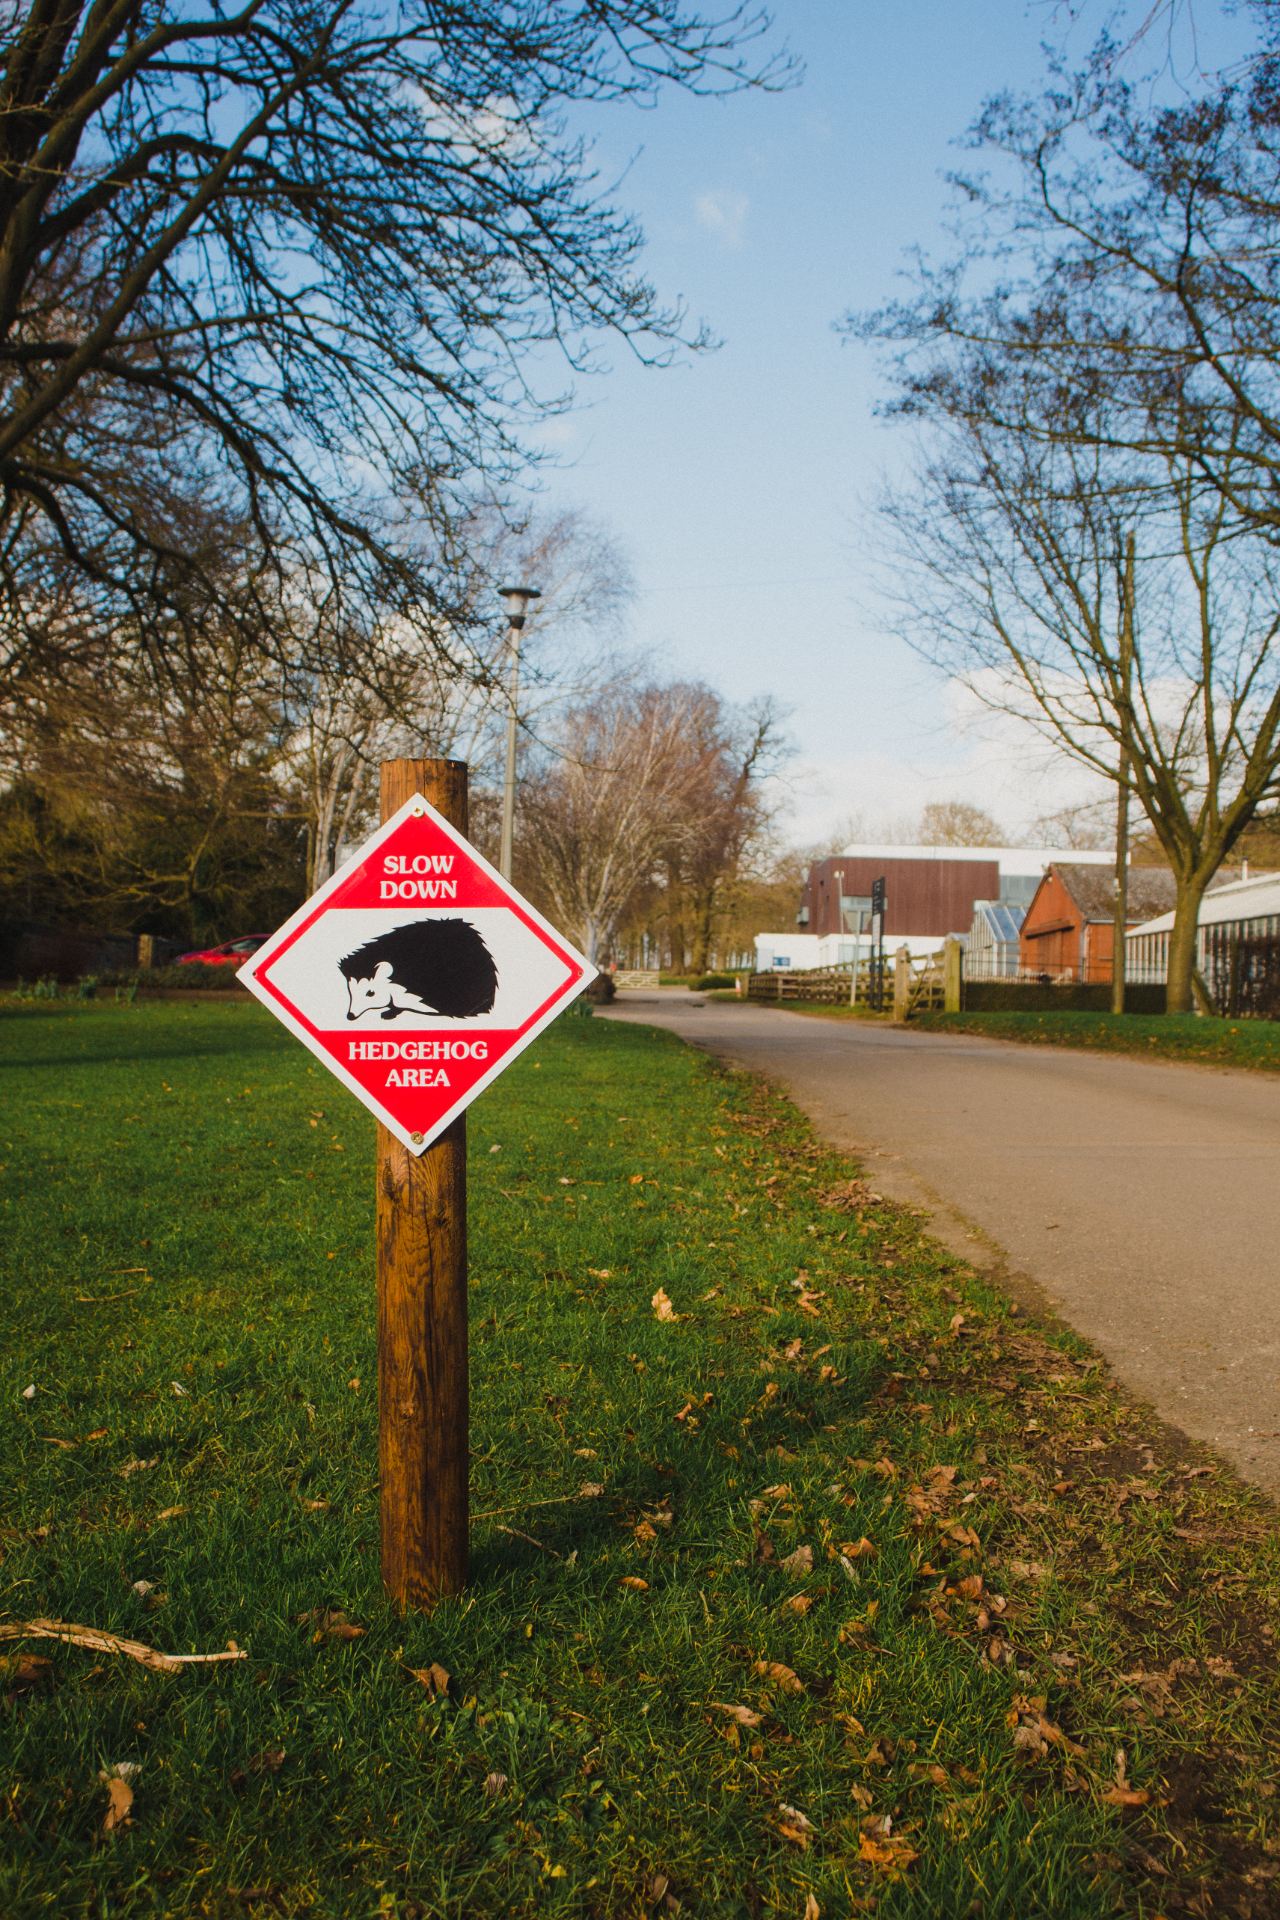 Image of a "slow down, hedgehog area" red road sign on a post next to a country road